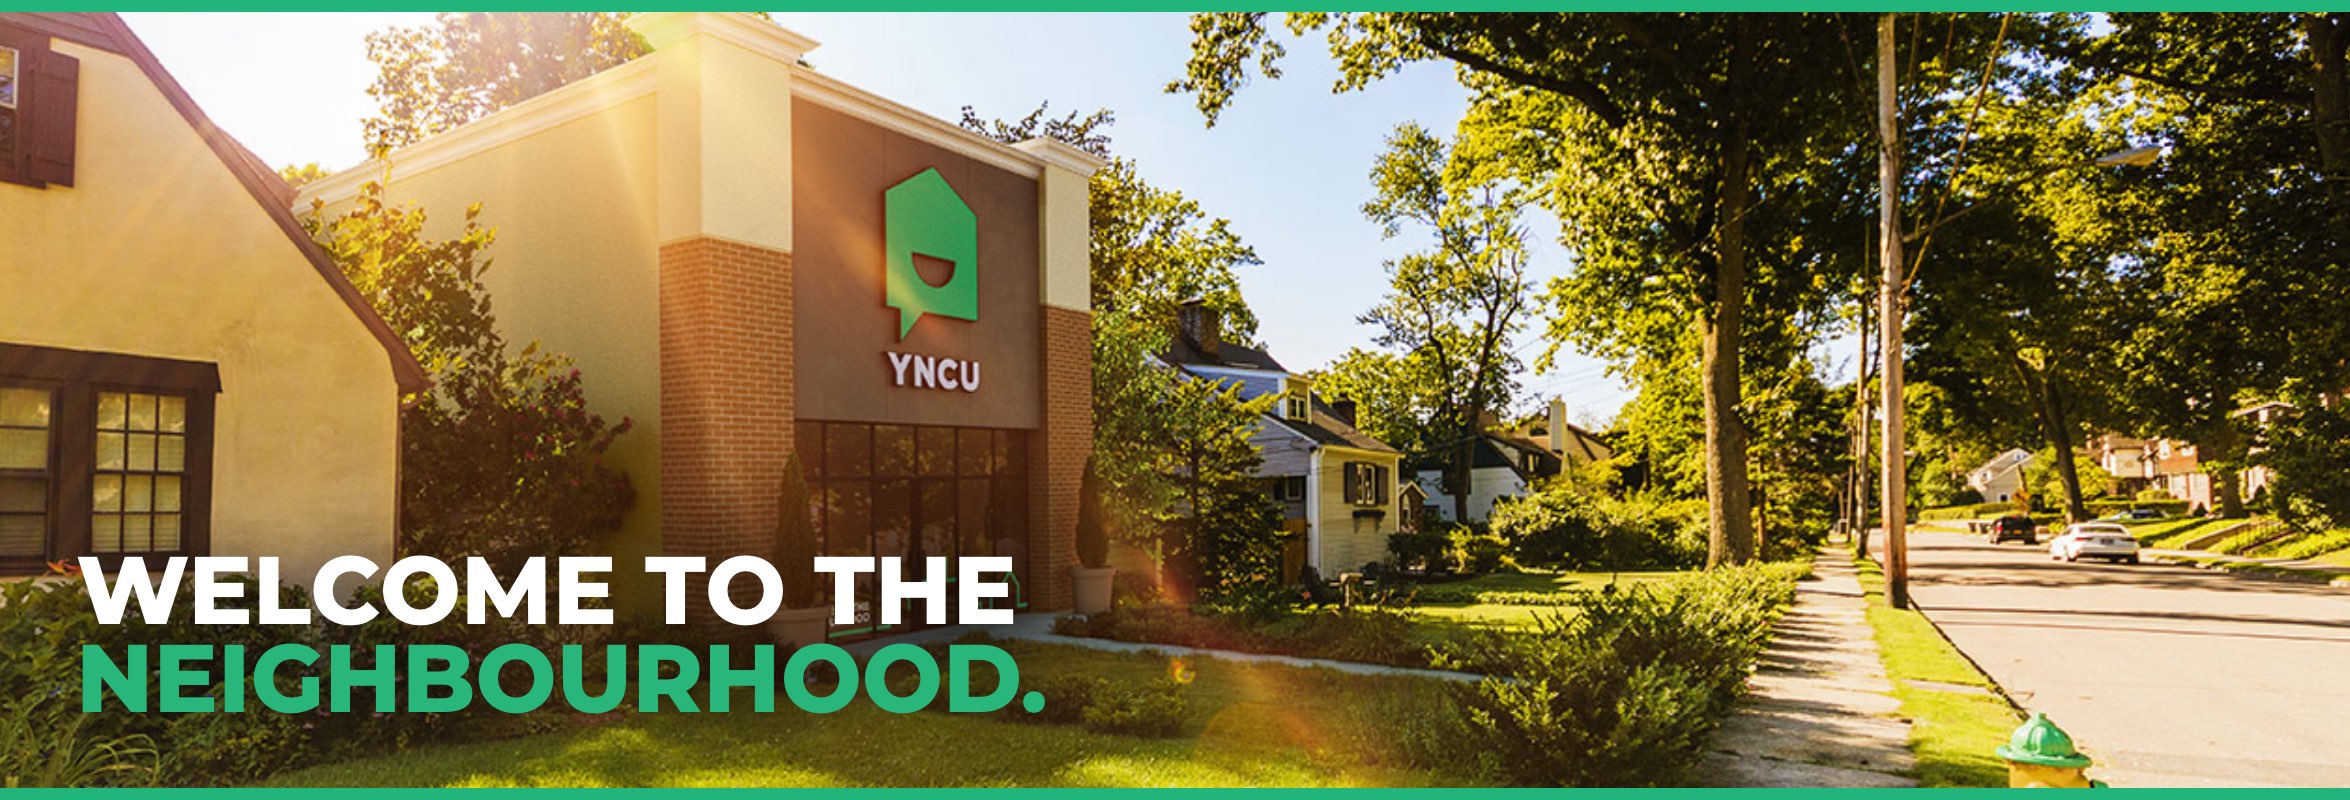 a YNCU branch situated between two residential homes